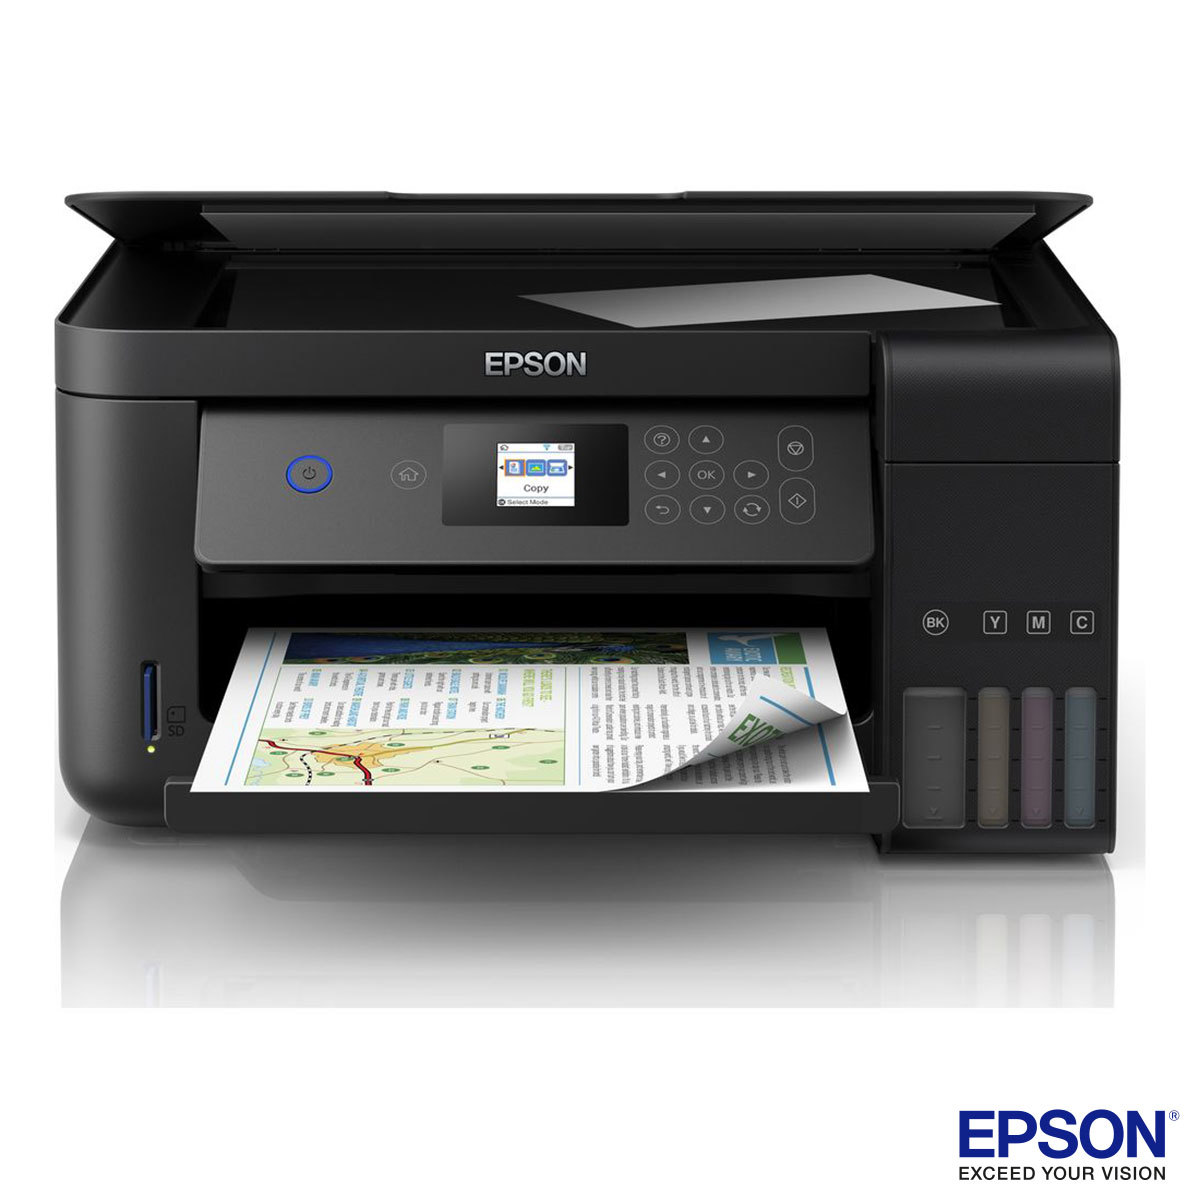 Buy Epson EcoTank ET-2750B Unlimited All in One Wireless Printer at costco.co.uk